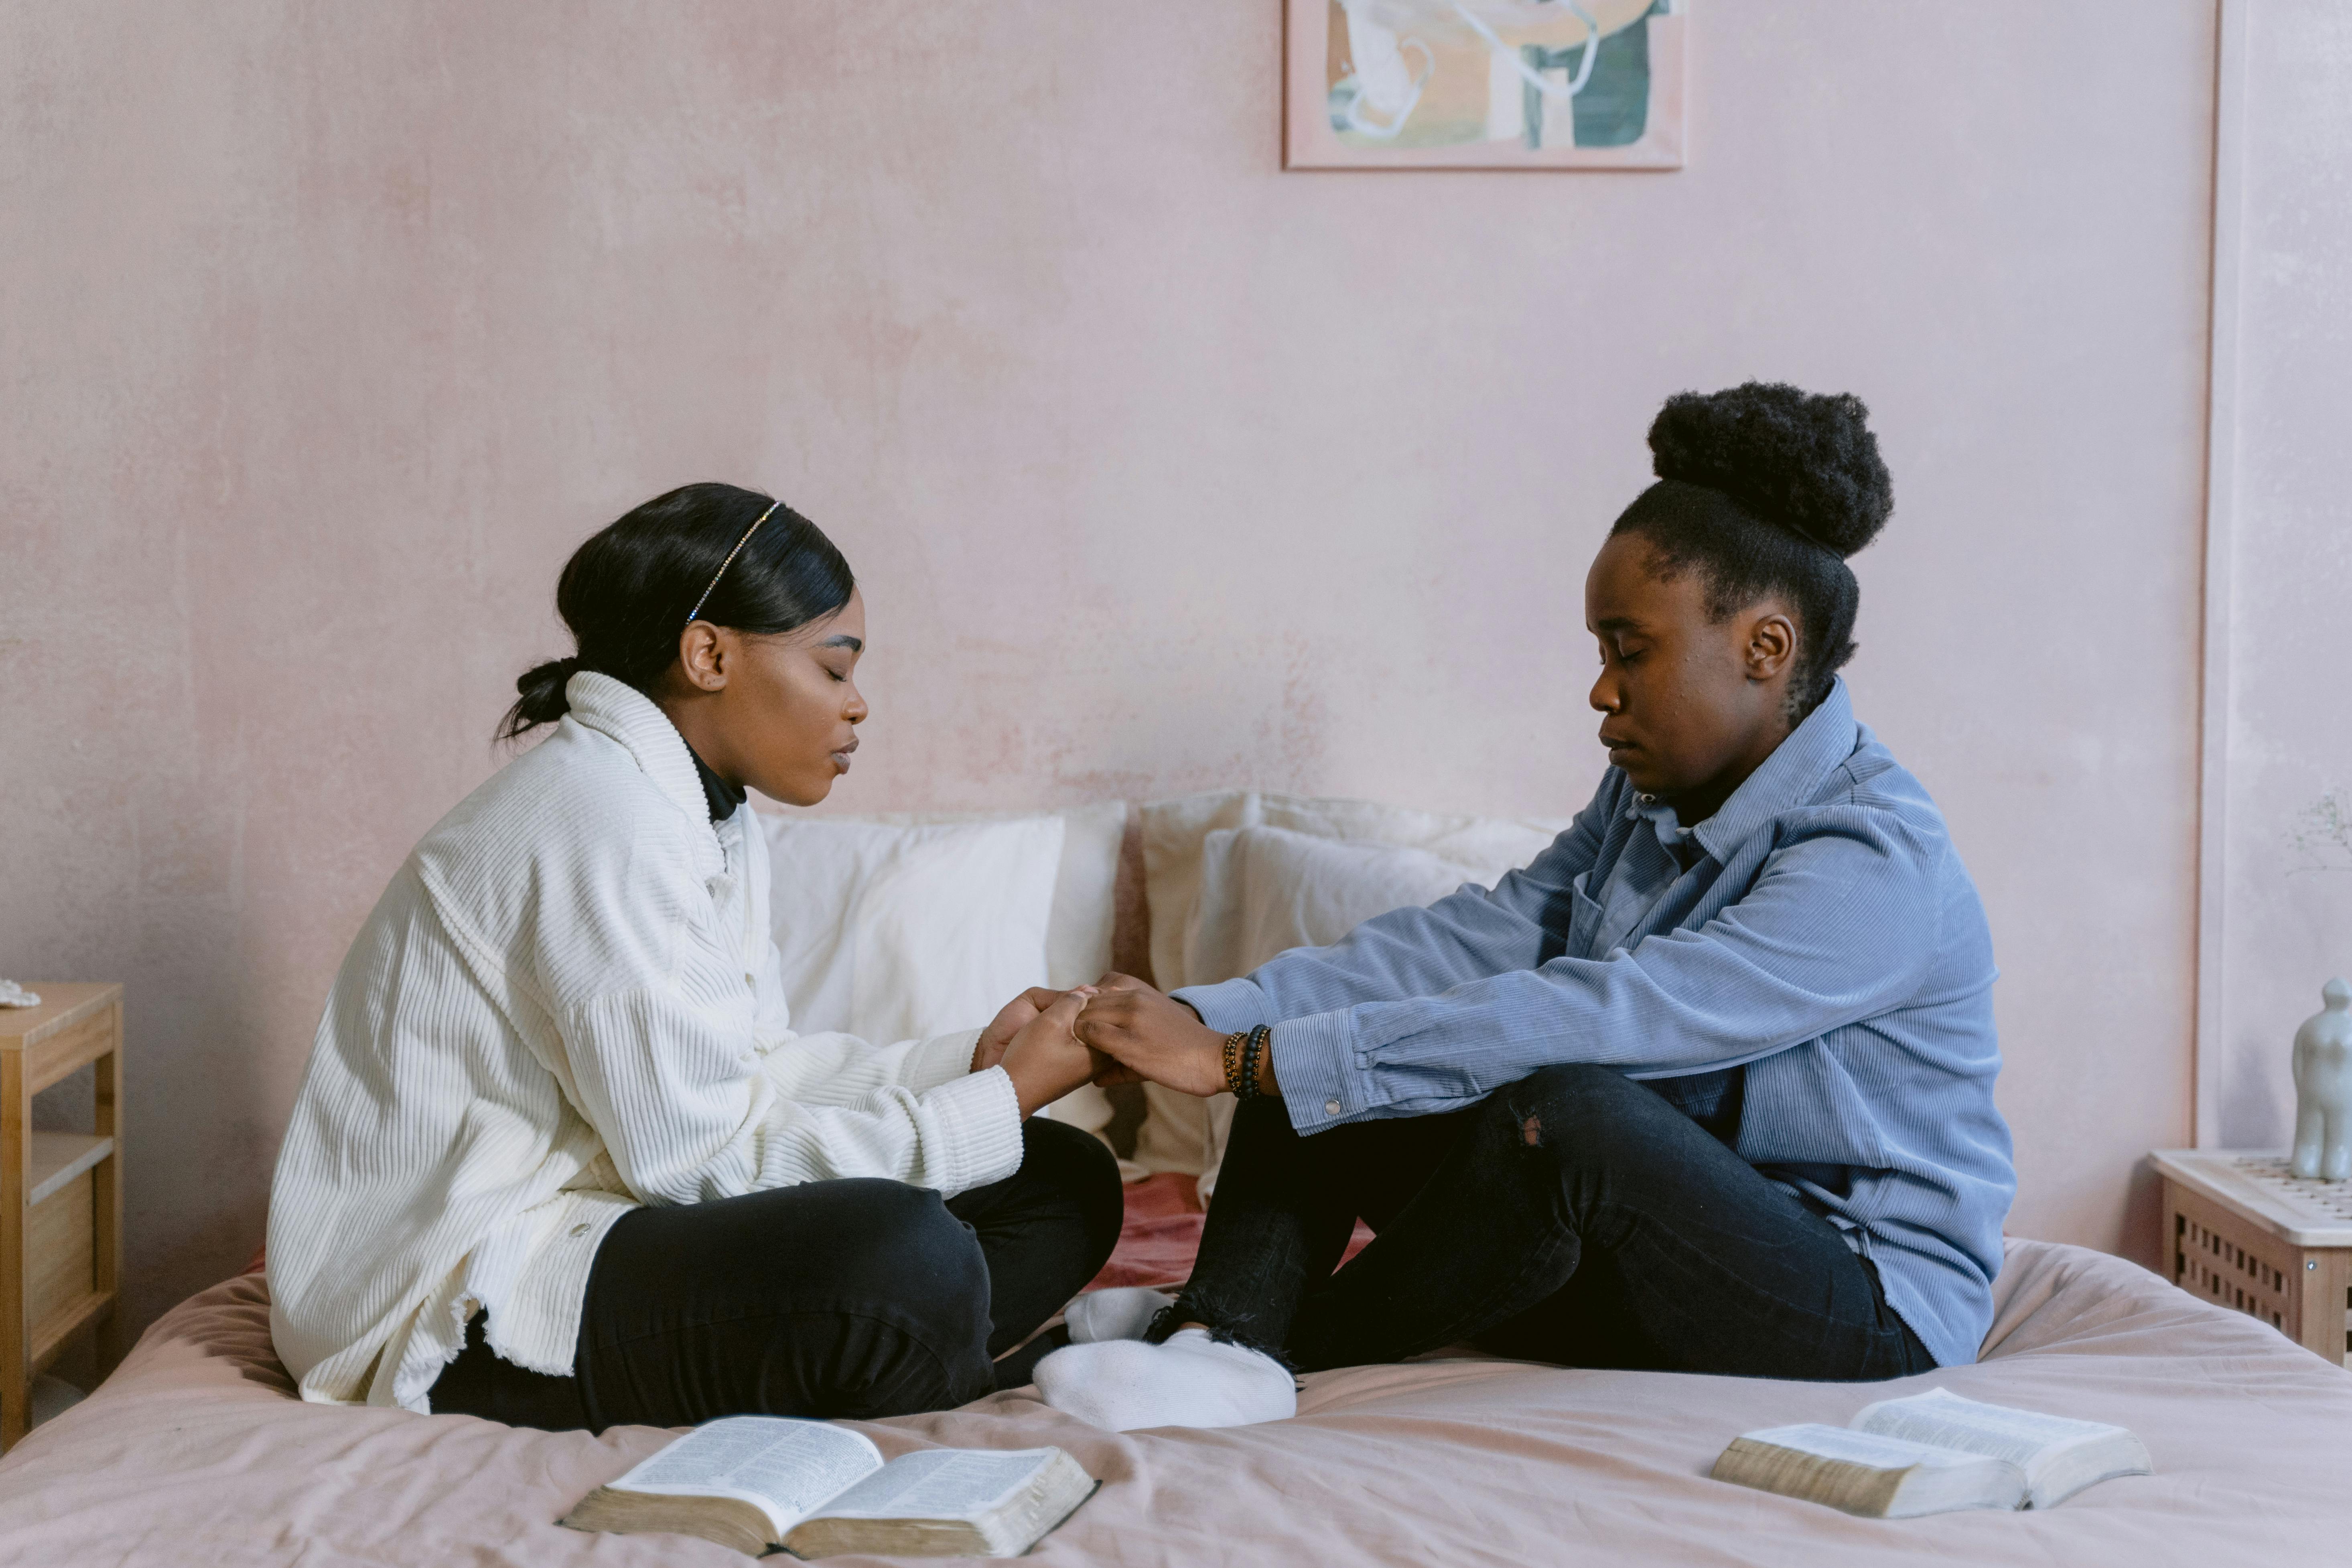 Women Sitting on Bed while Praying Together
